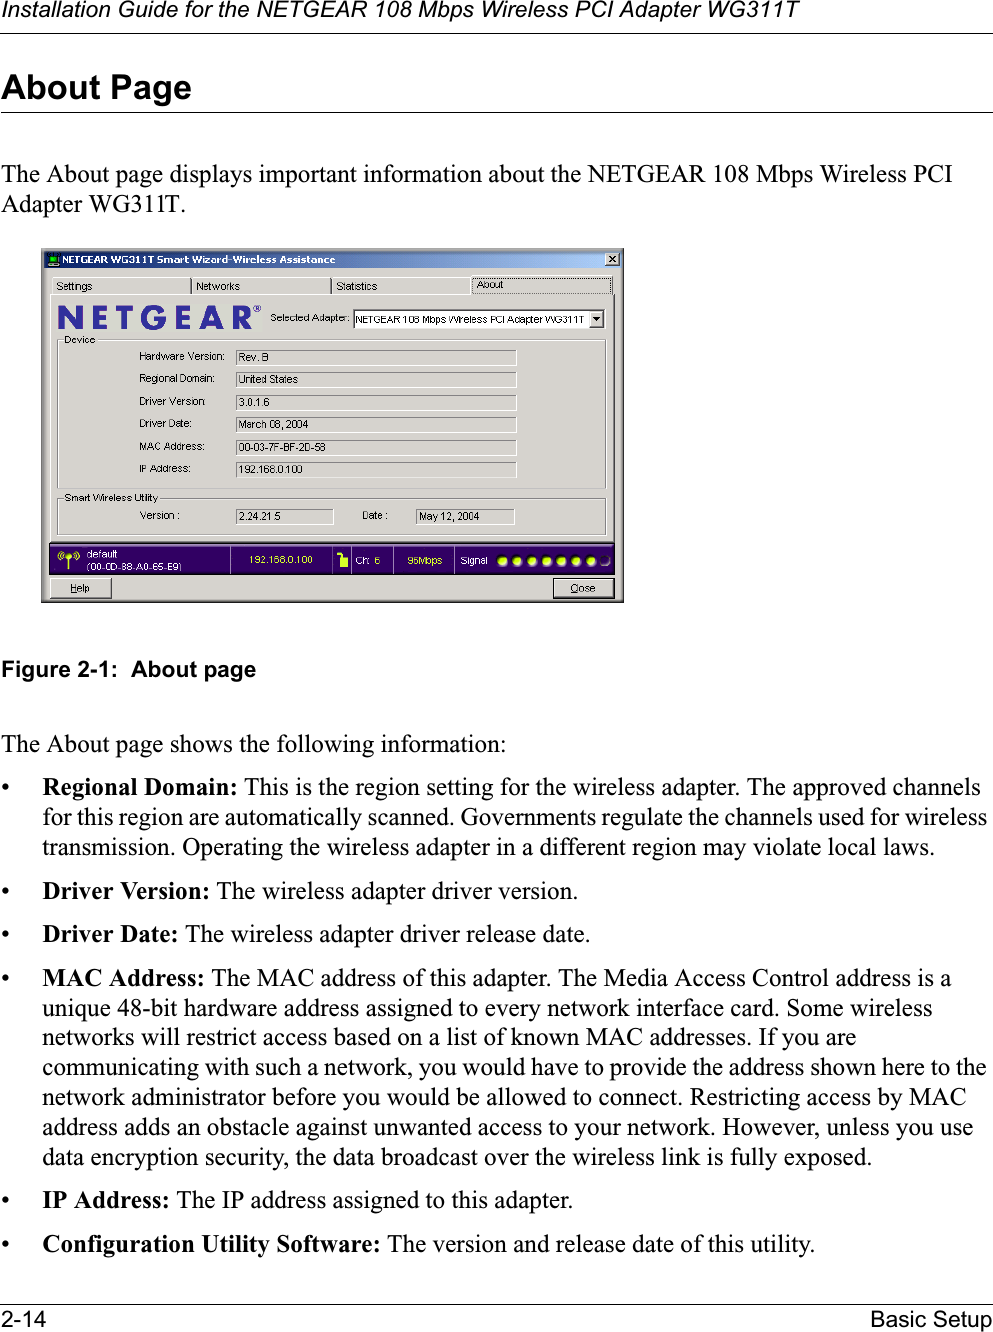 Installation Guide for the NETGEAR 108 Mbps Wireless PCI Adapter WG311T2-14 Basic SetupAbout PageThe About page displays important information about the NETGEAR 108 Mbps Wireless PCI Adapter WG311T. Figure 2-1:  About pageThe About page shows the following information:•Regional Domain: This is the region setting for the wireless adapter. The approved channels for this region are automatically scanned. Governments regulate the channels used for wireless transmission. Operating the wireless adapter in a different region may violate local laws.•Driver Version: The wireless adapter driver version. •Driver Date: The wireless adapter driver release date.•MAC Address: The MAC address of this adapter. The Media Access Control address is a unique 48-bit hardware address assigned to every network interface card. Some wireless networks will restrict access based on a list of known MAC addresses. If you are communicating with such a network, you would have to provide the address shown here to the network administrator before you would be allowed to connect. Restricting access by MAC address adds an obstacle against unwanted access to your network. However, unless you use data encryption security, the data broadcast over the wireless link is fully exposed.•IP Address: The IP address assigned to this adapter.•Configuration Utility Software: The version and release date of this utility.